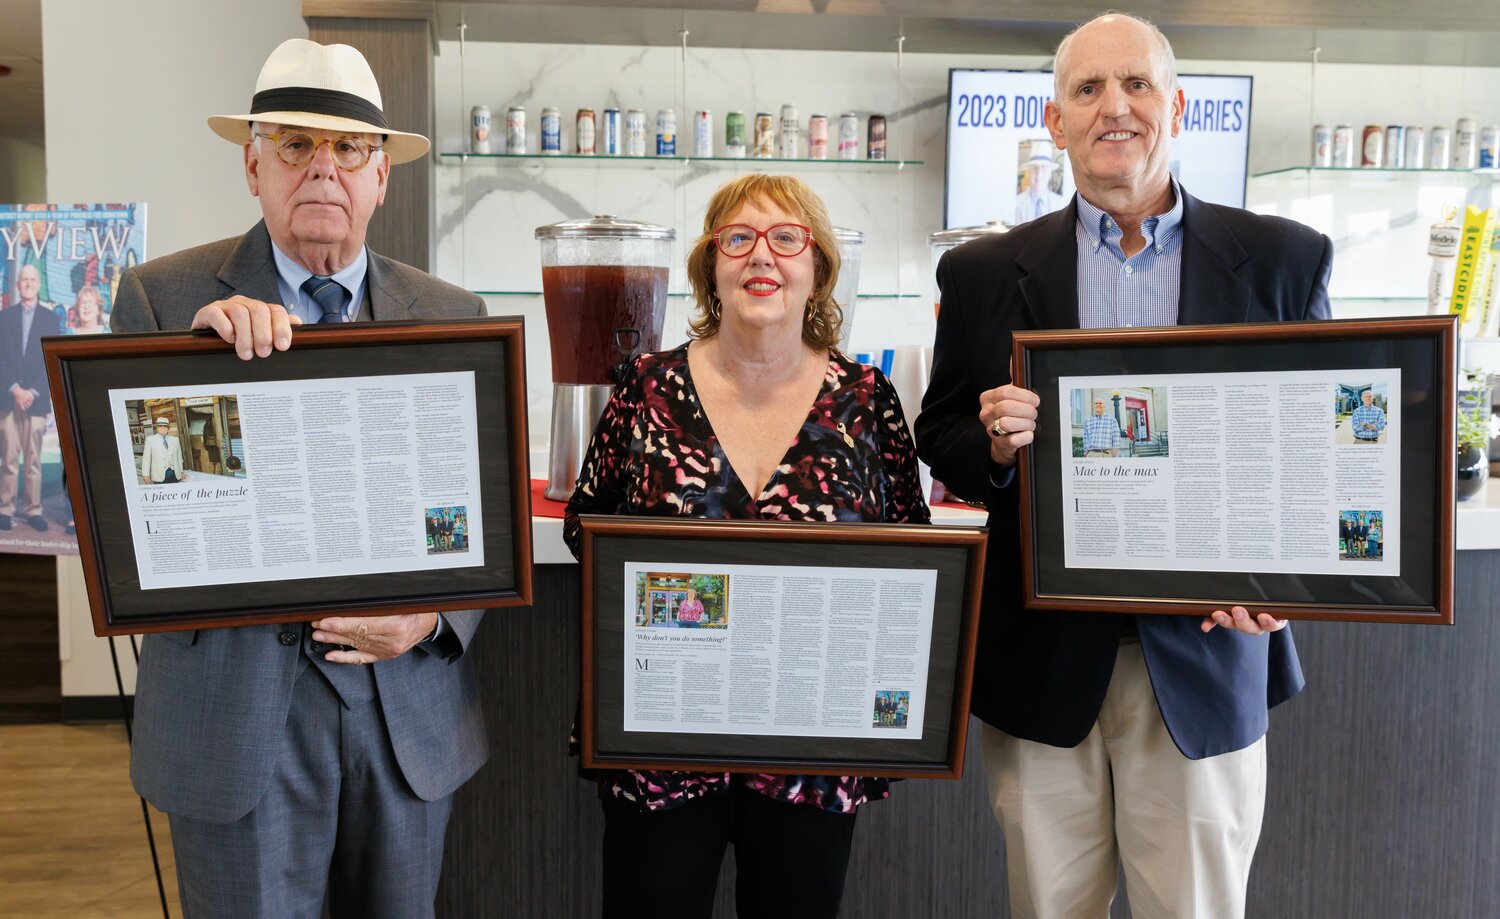 Bruce Daws, left, Molly Arnold and Mac Healy hold their Downtown Visionaries awards, which were presented by CityView magazine on Thursday at Segra Stadium.